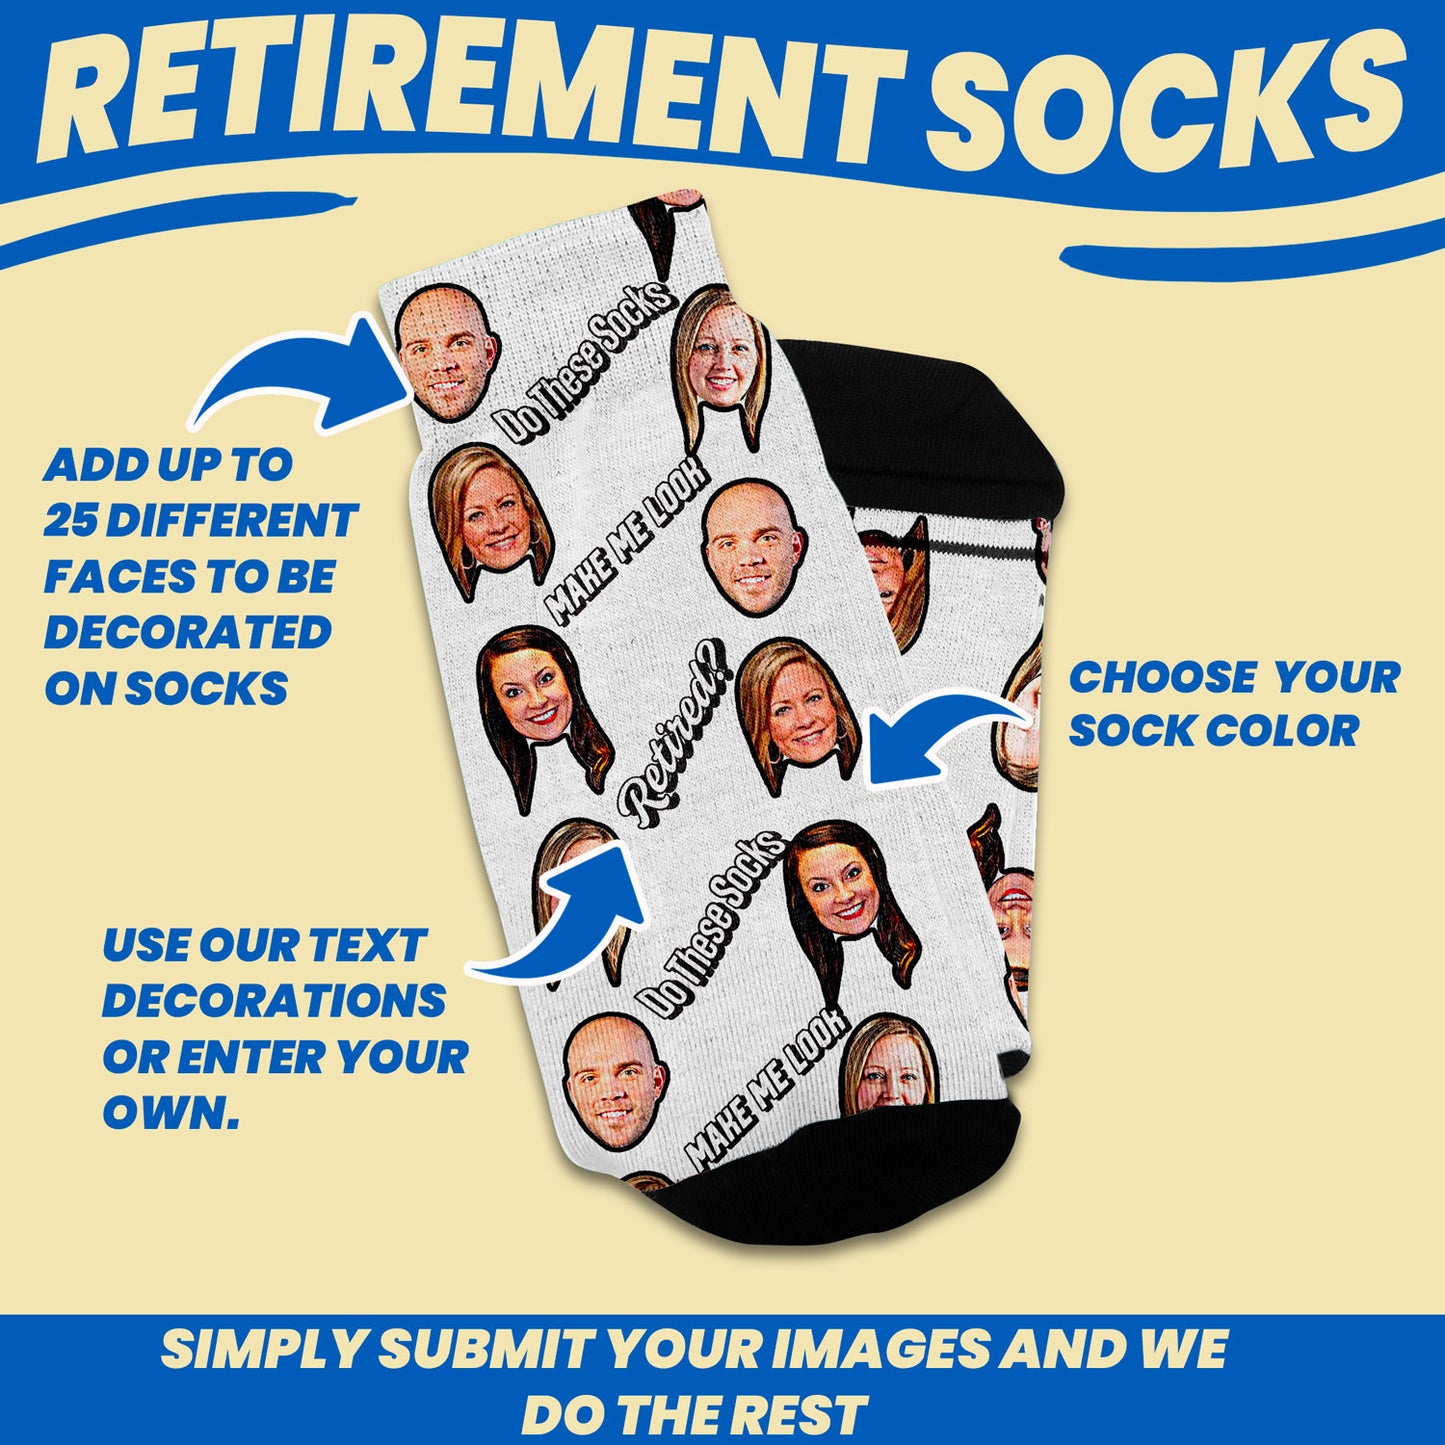 Retirement gift for coworker personalized socks with faces customization features such as 25 faces, custom text and custom sock color